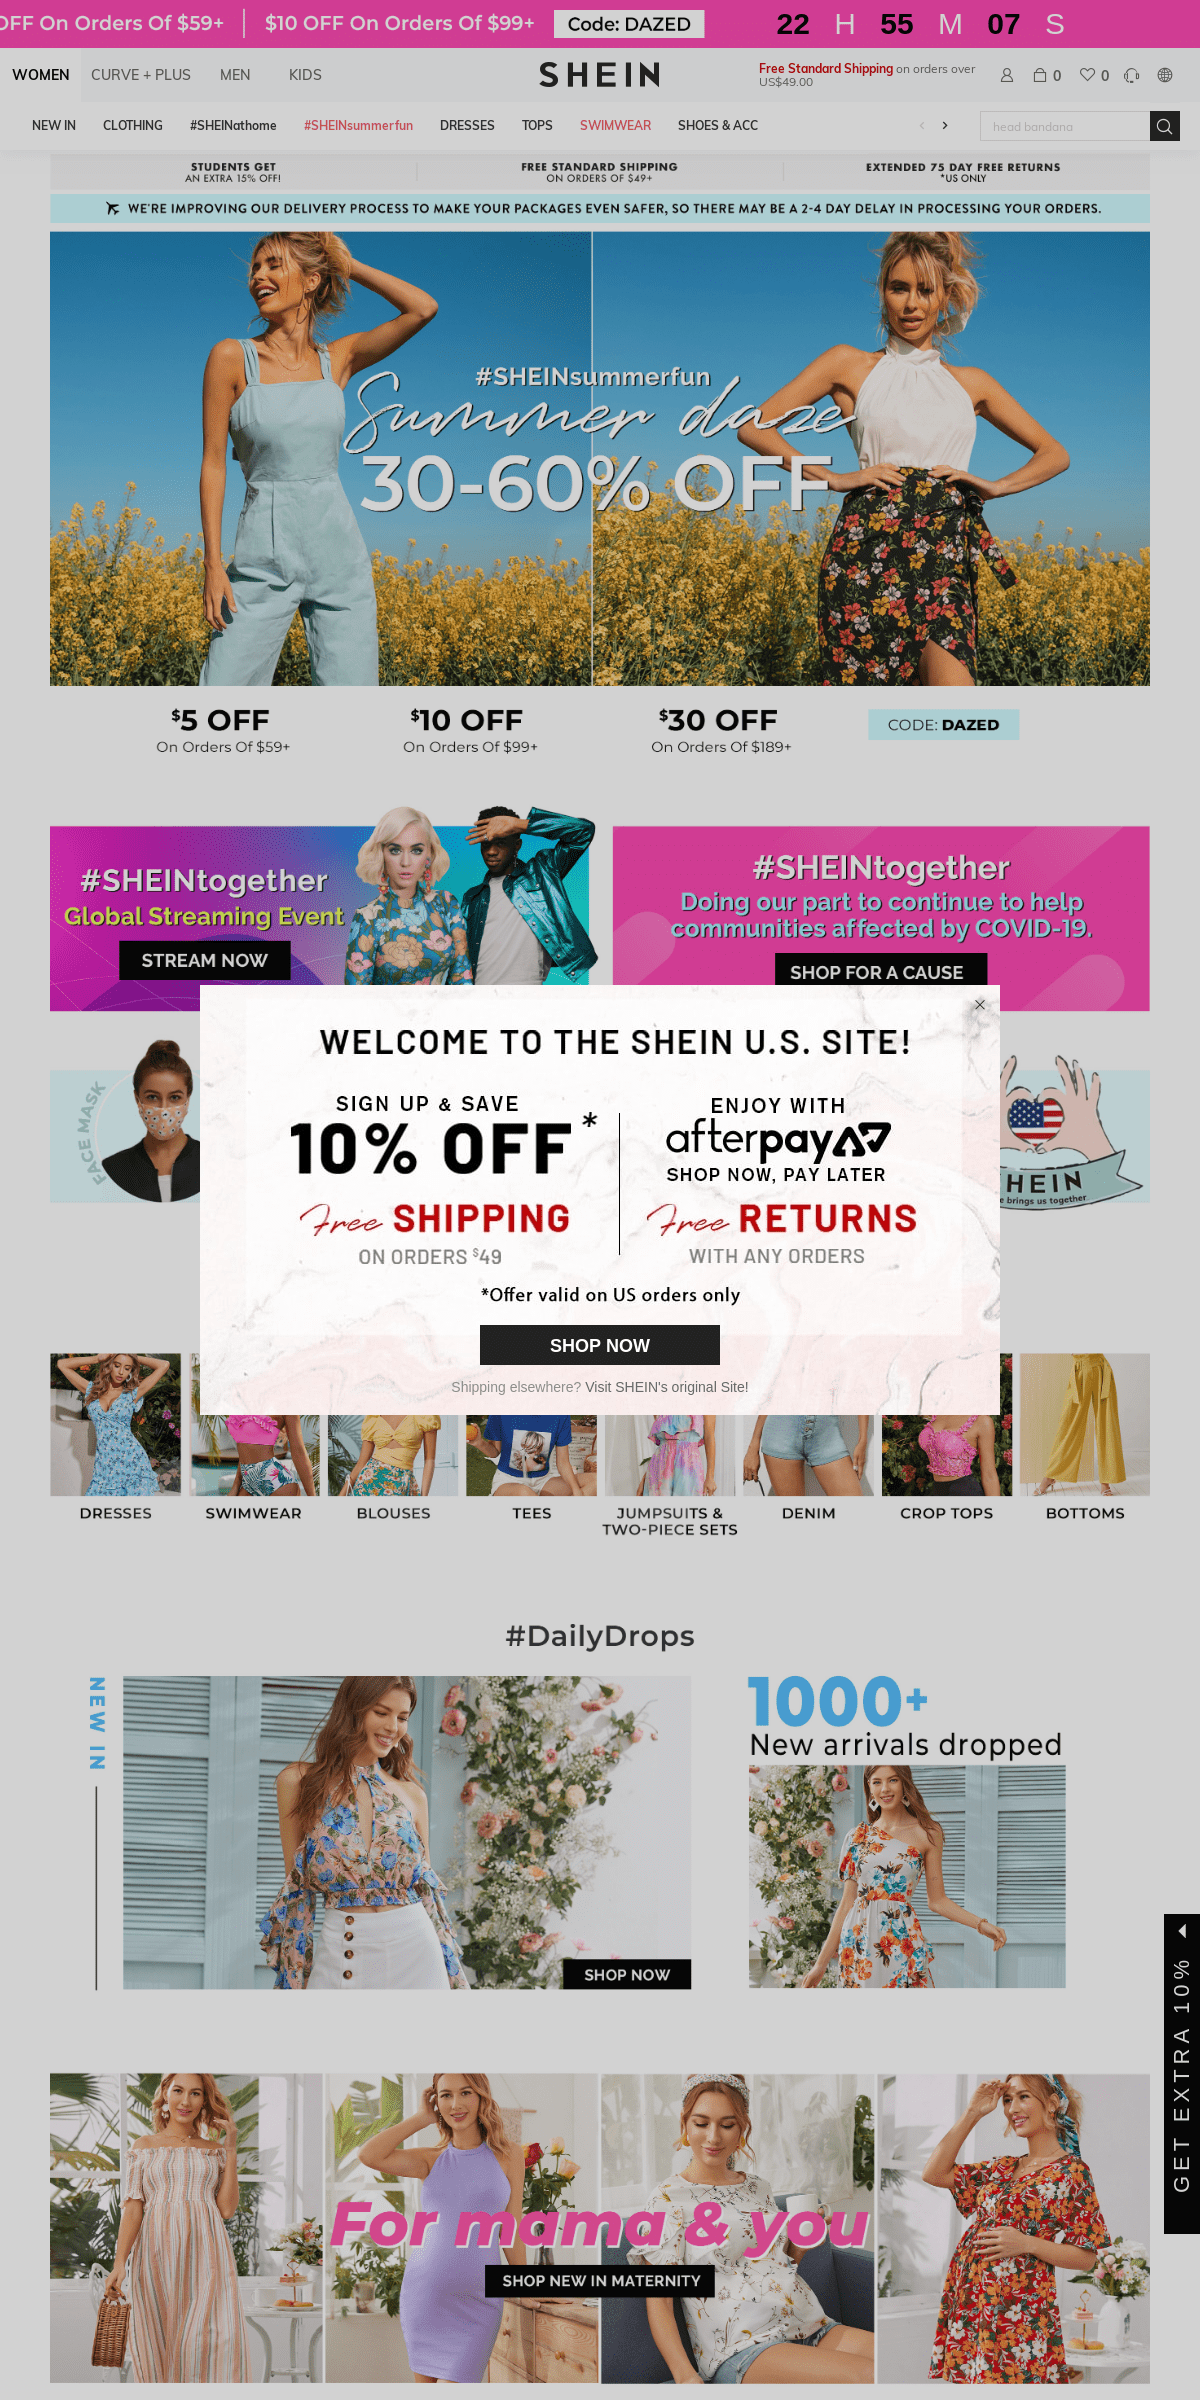 A complete backup of shein.com